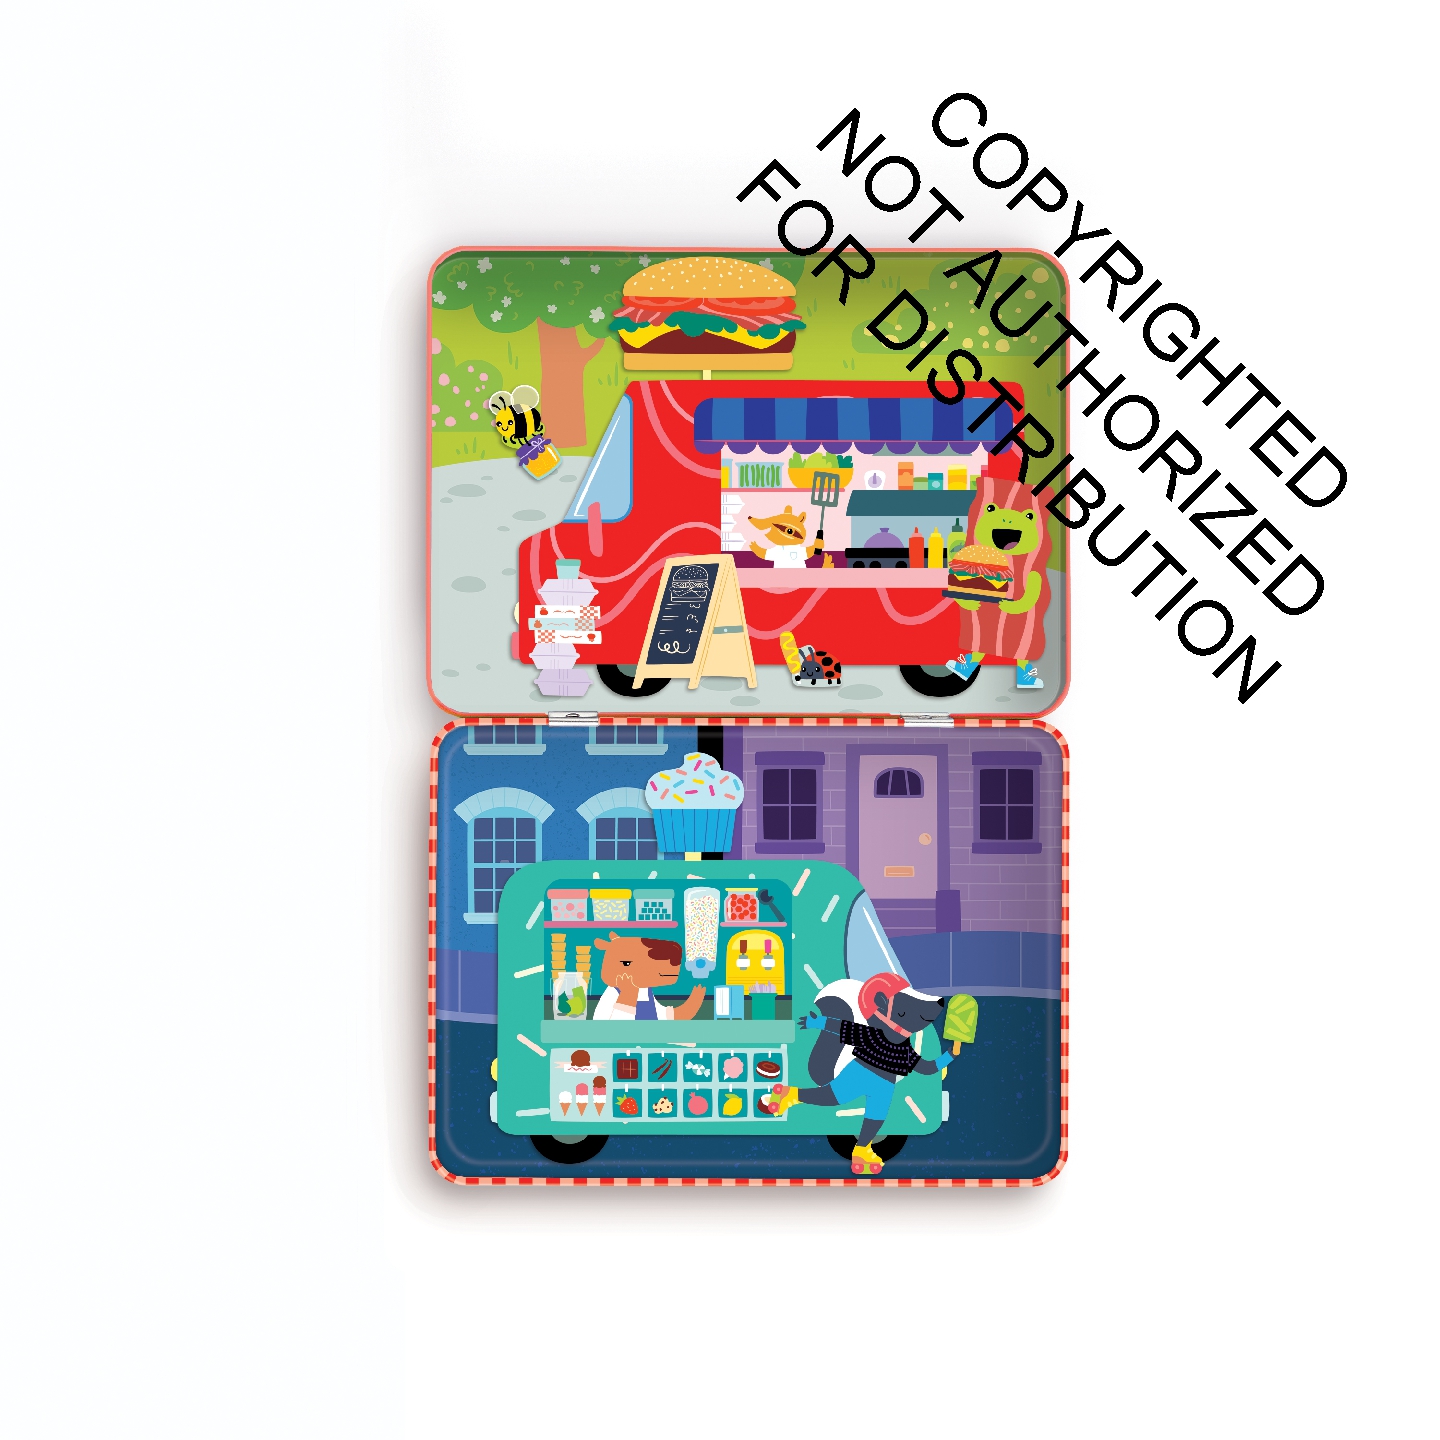 Food Truck Festival Magnetic Play Set